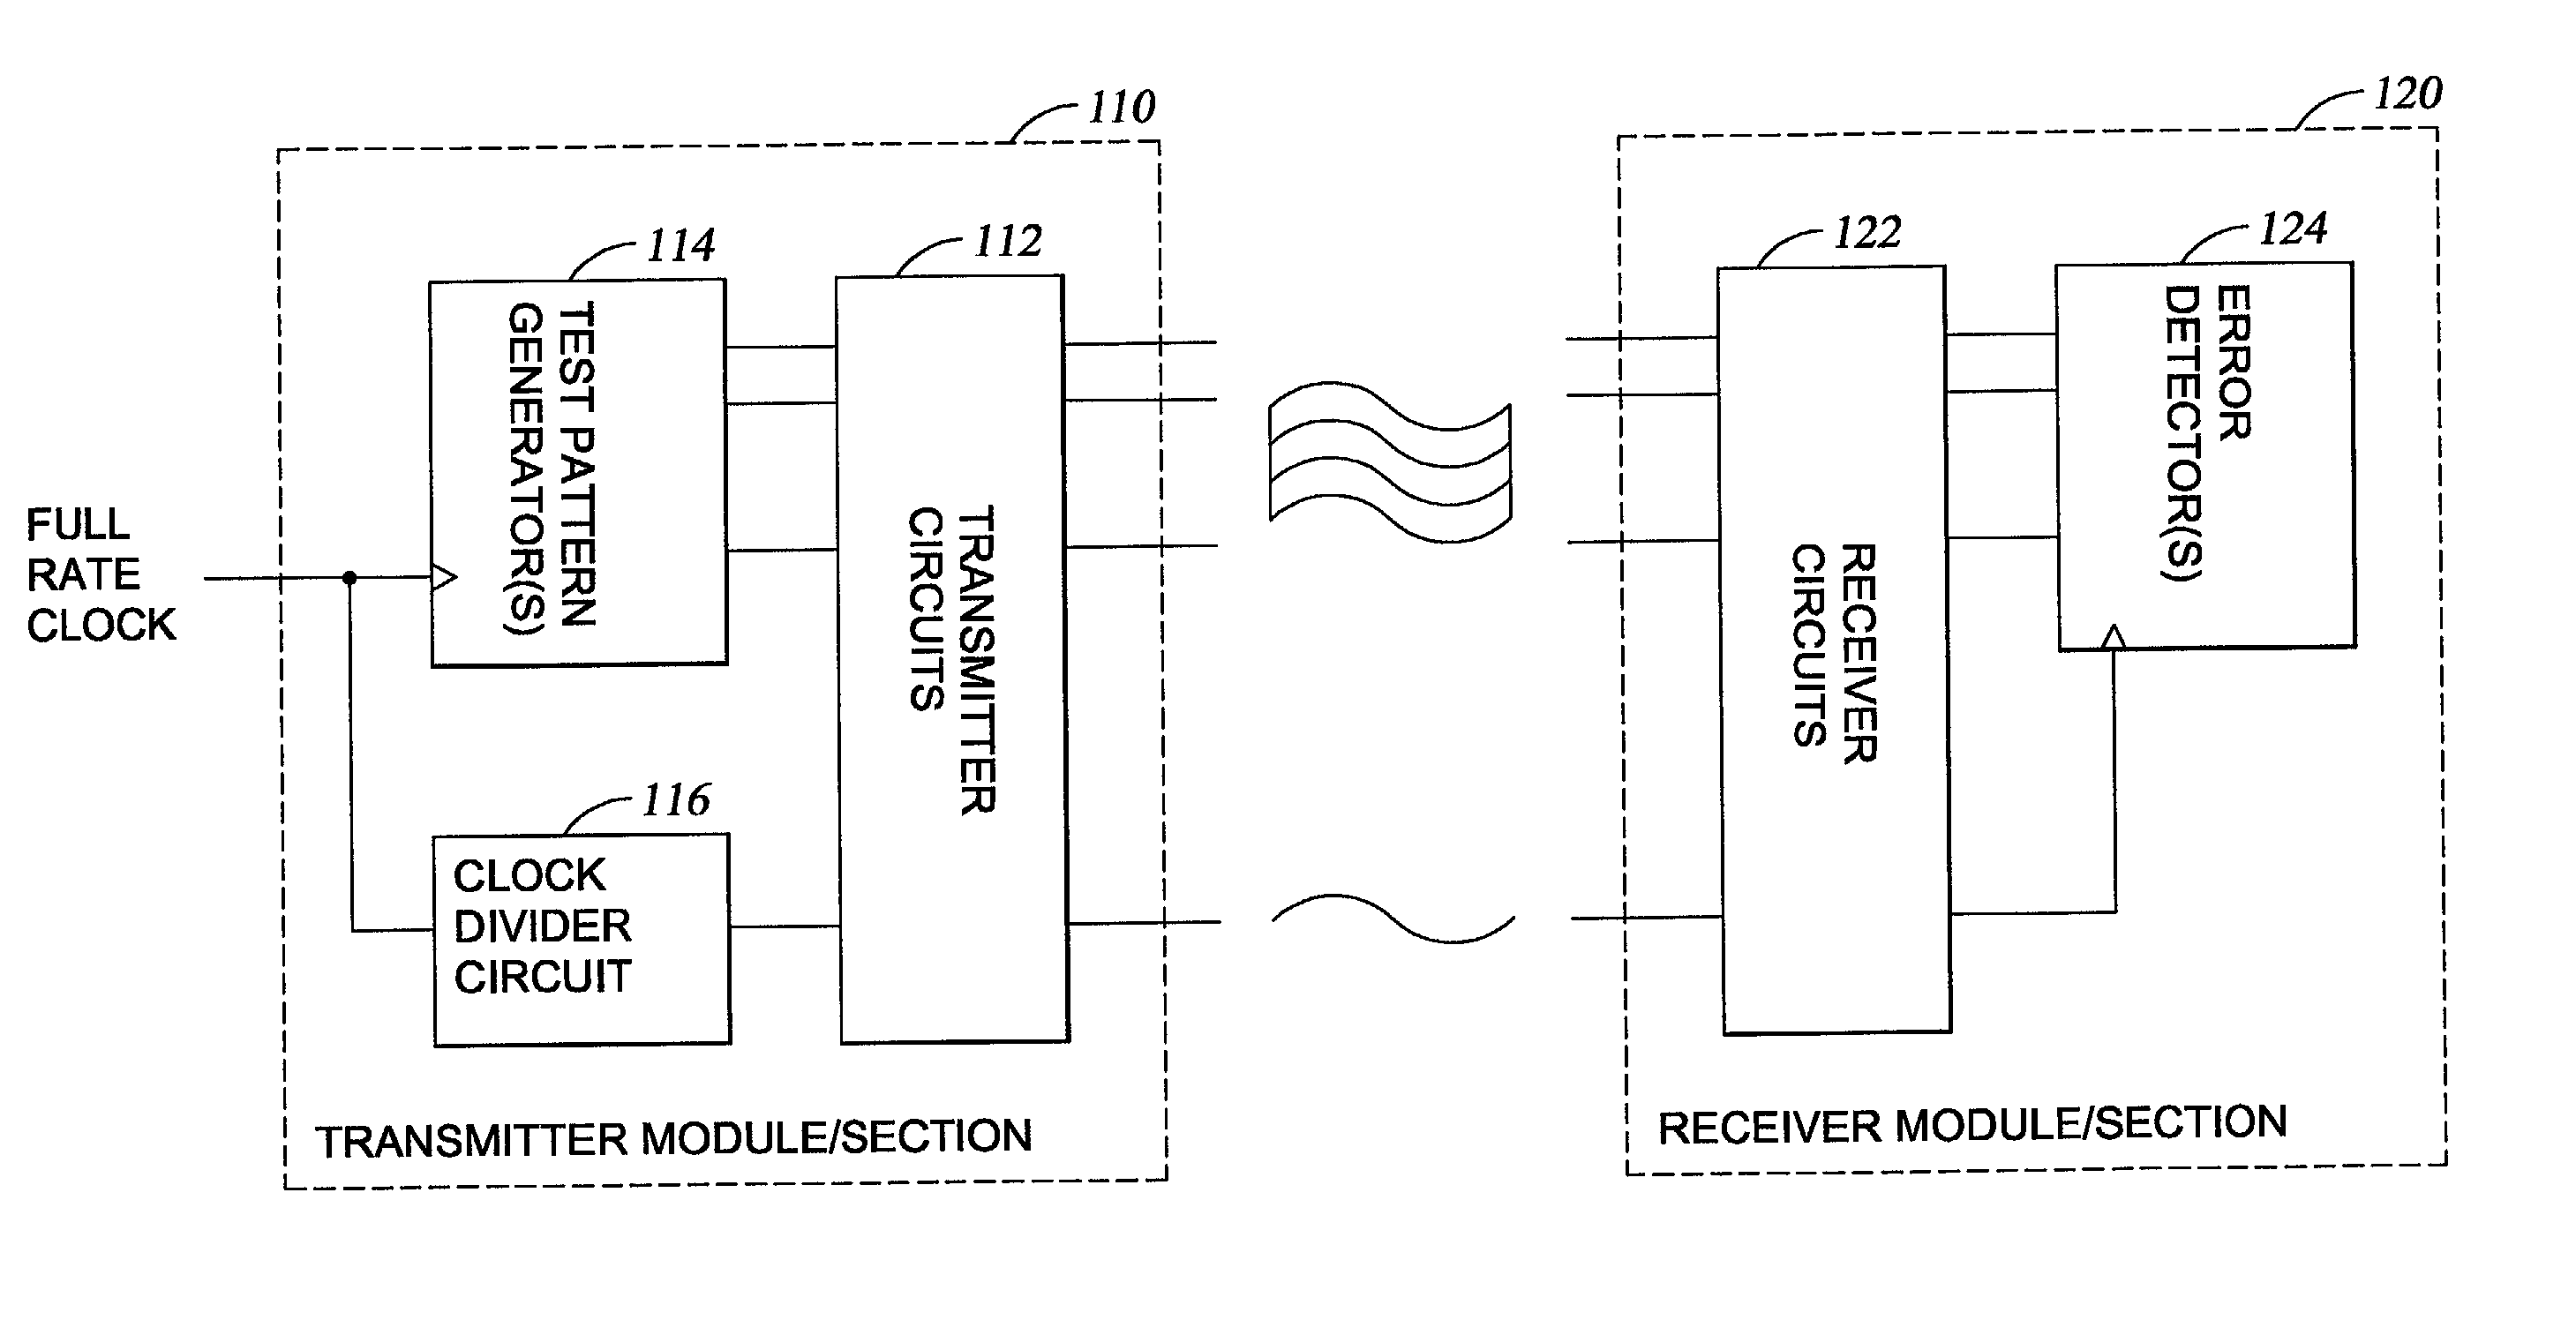 Architecture for built-in self-test of parallel optical transceivers